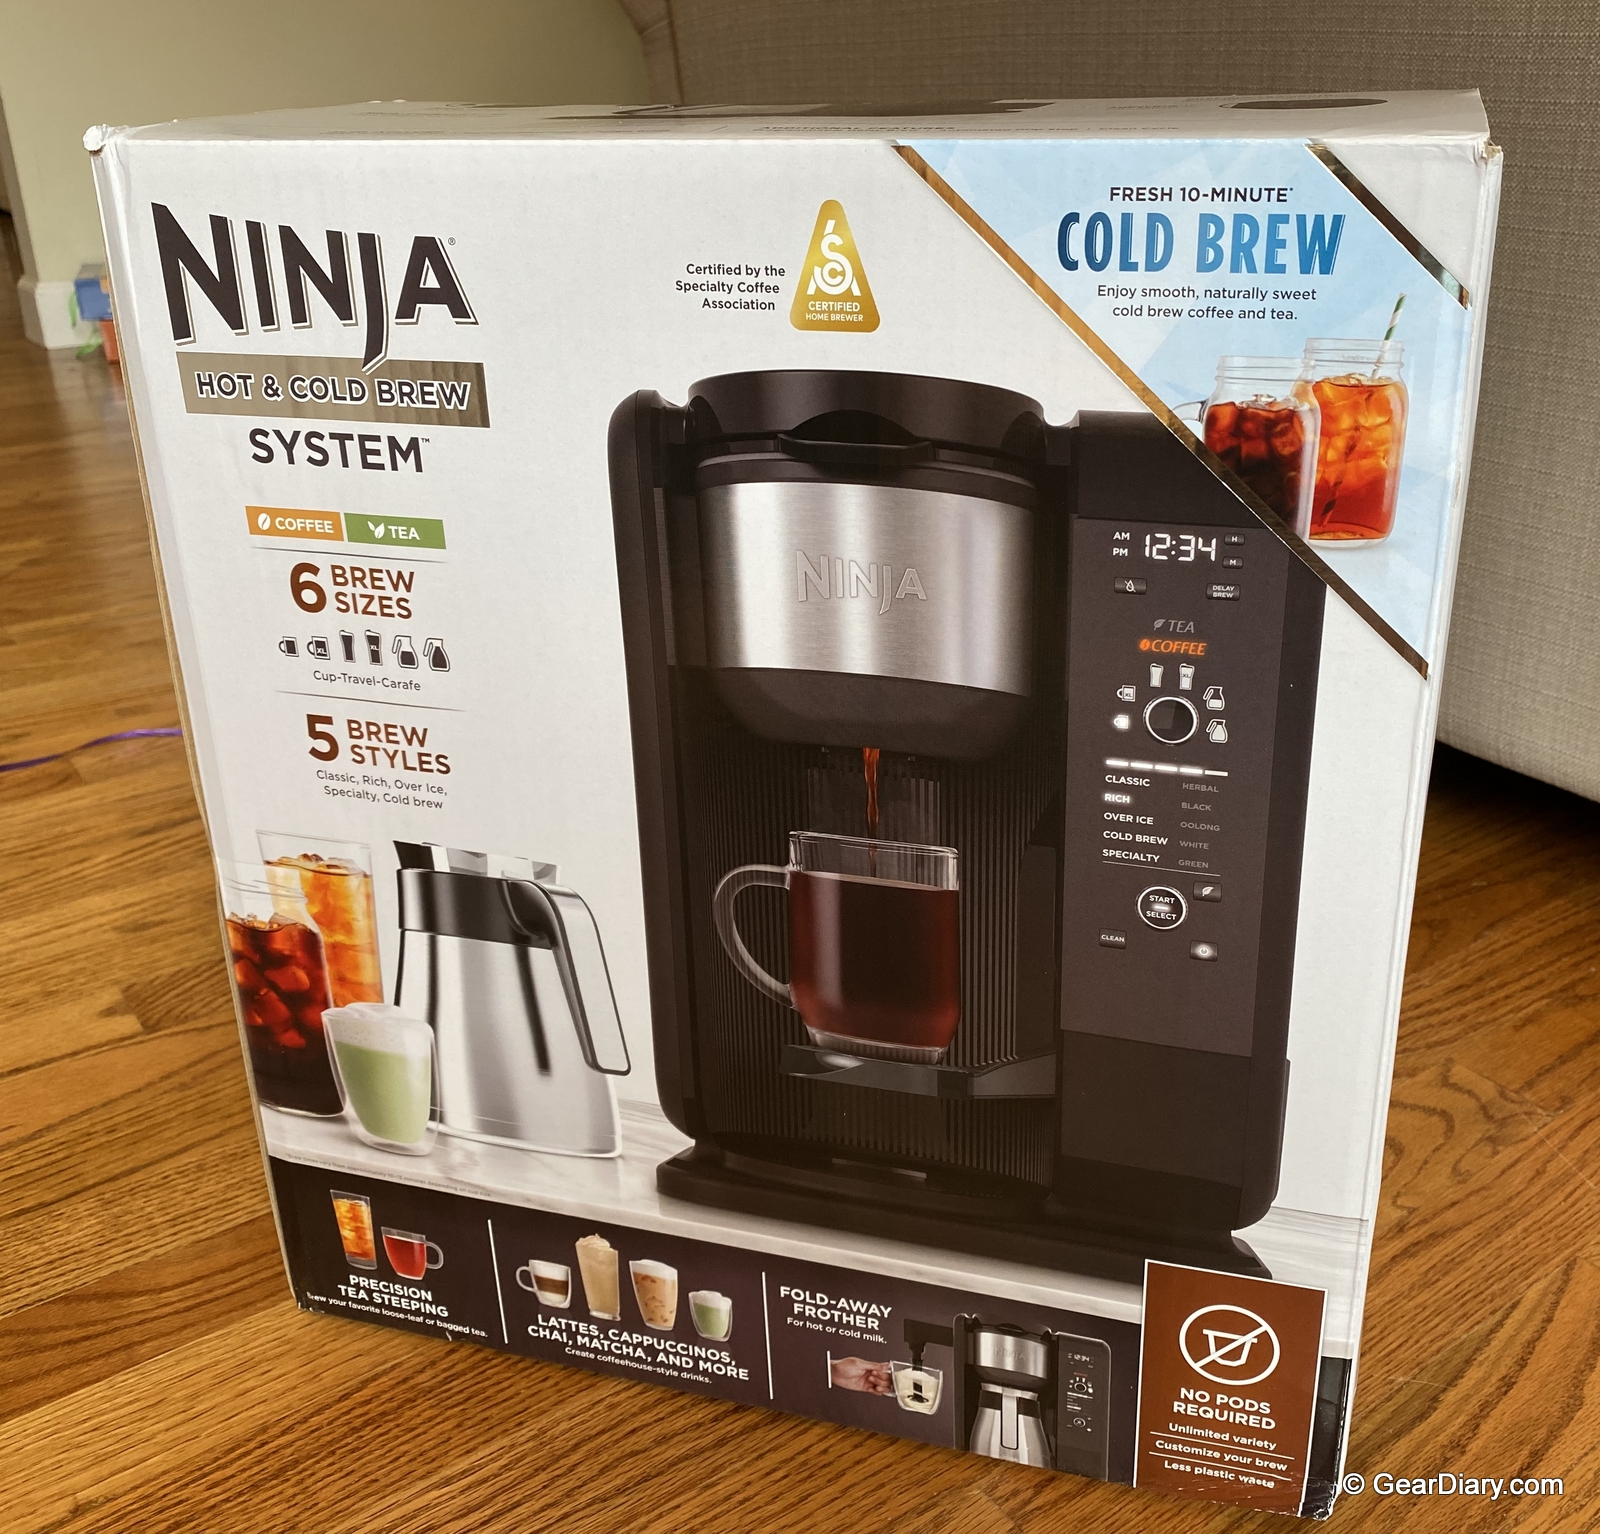 How to use the Ninja Hot & Cold Brewed System's™ Integrated